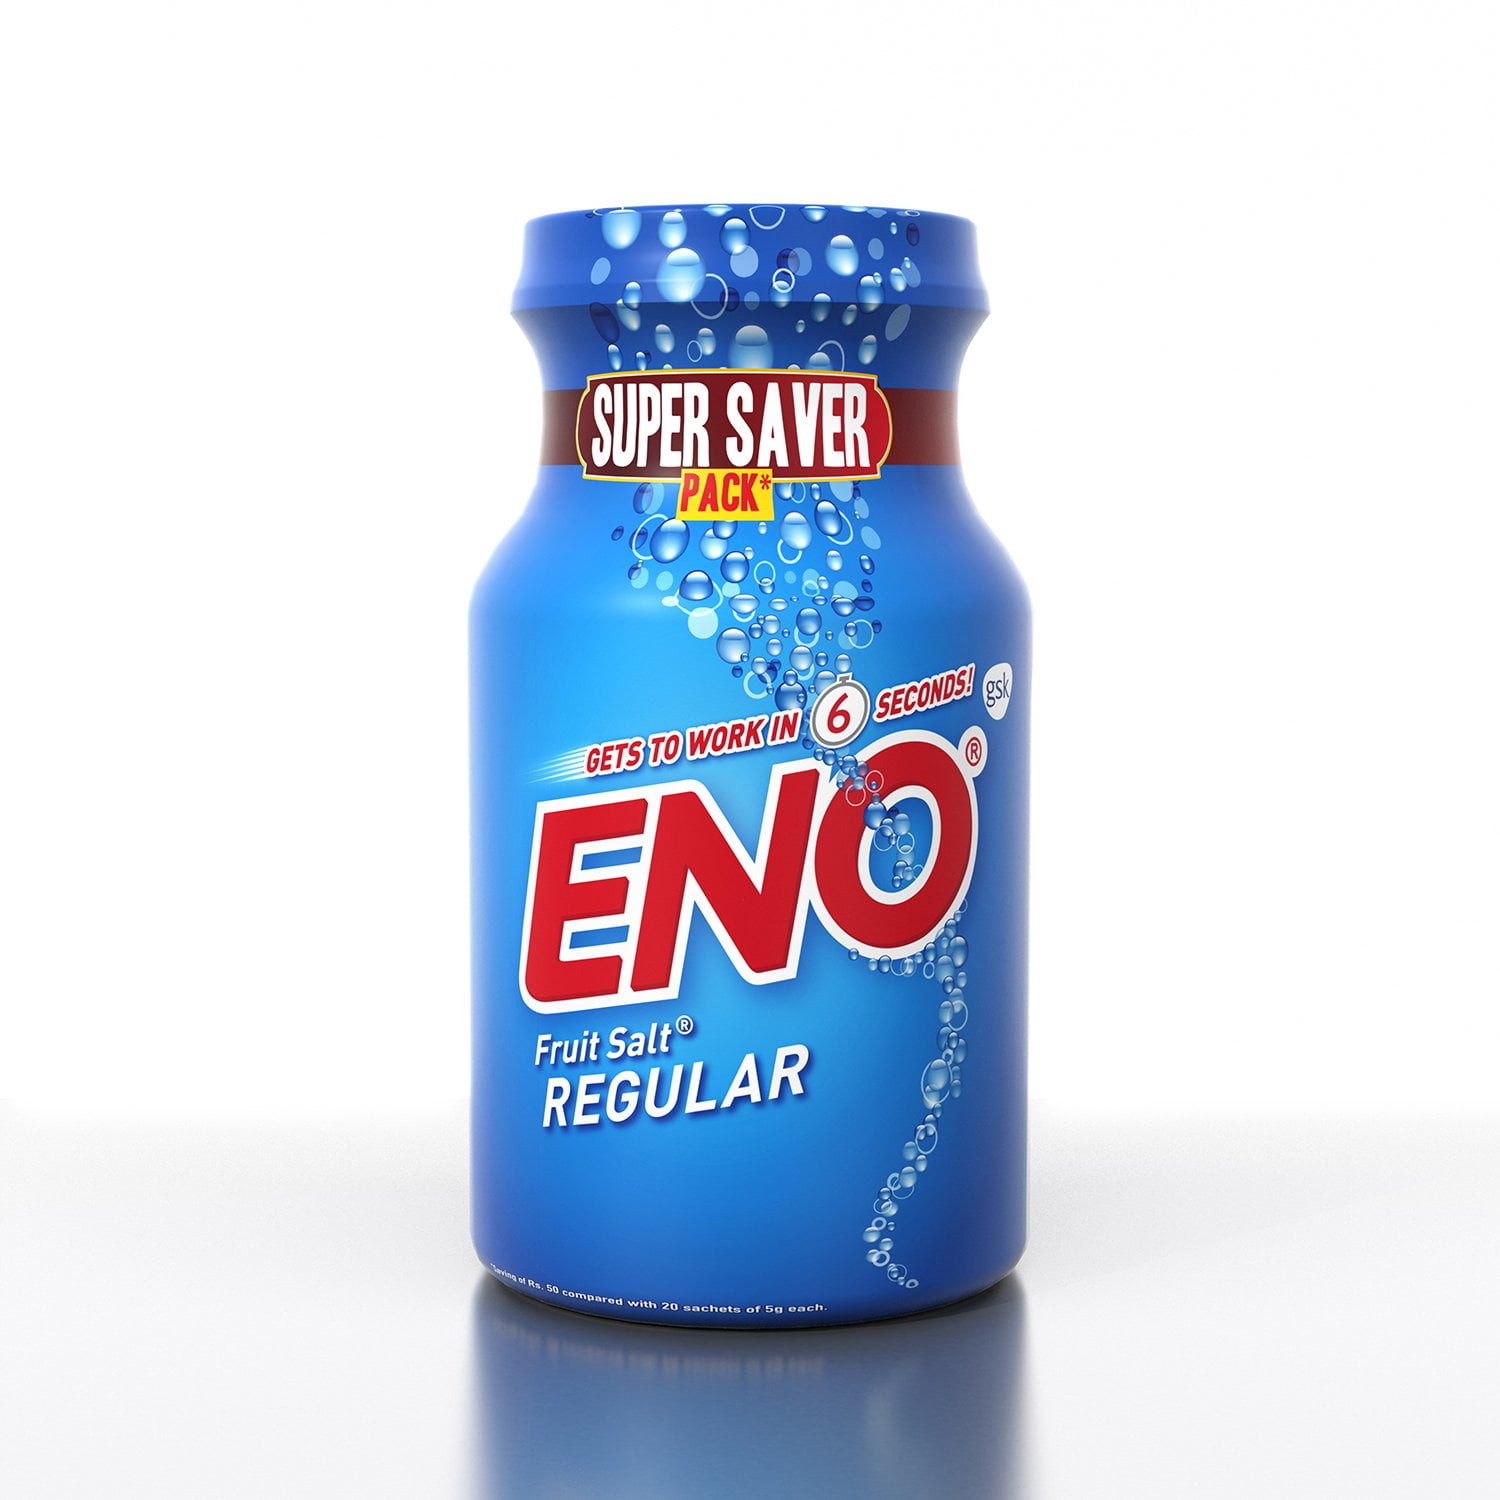 What are Some Downsides of Eno Fruit Salt?